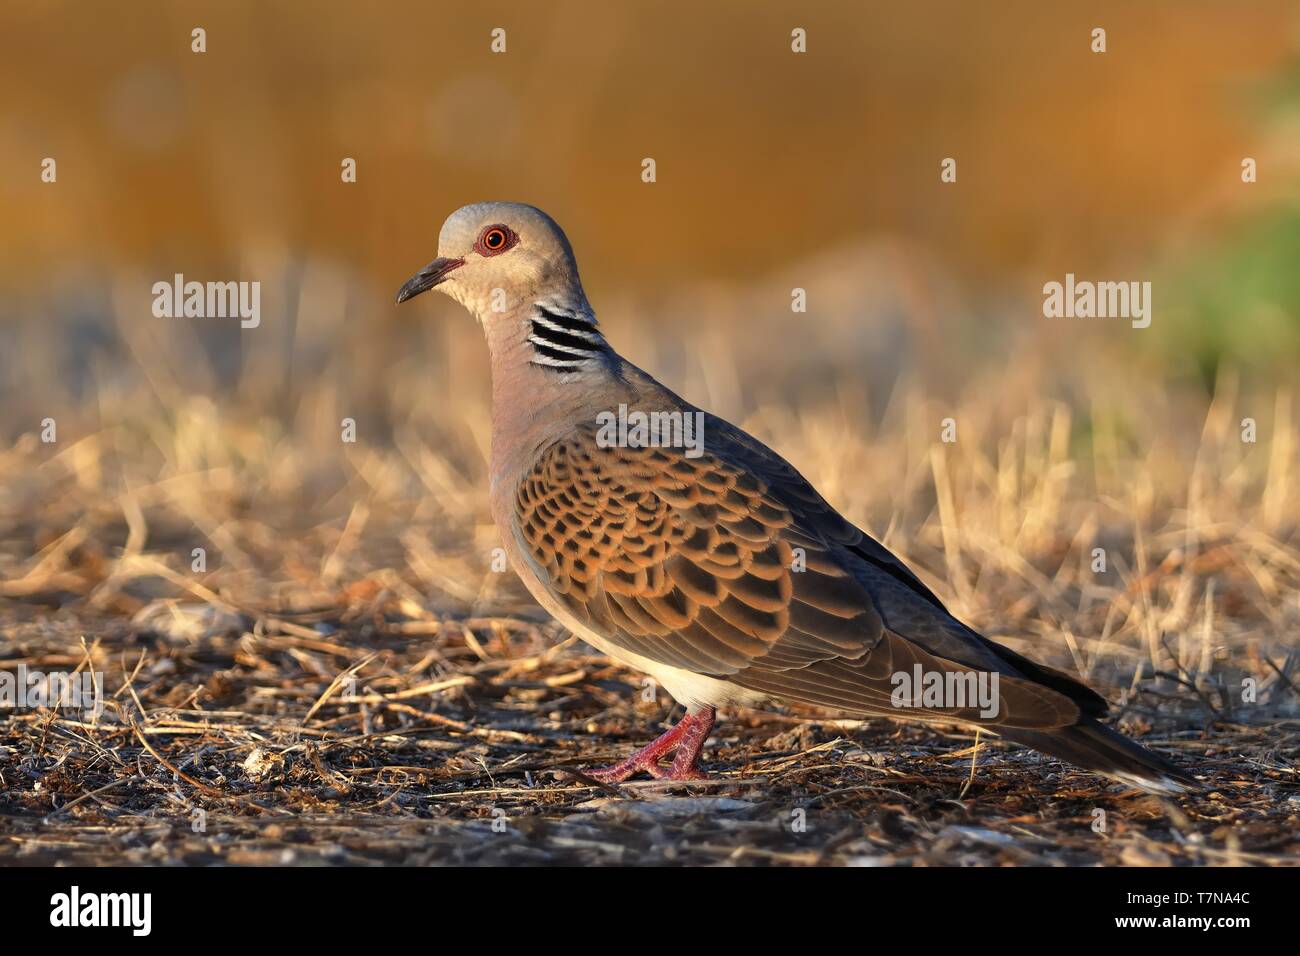 European Turtle-Dove - Streptopelia turtur sittong on the ground in the evening light, nice background, beautiful colours Stock Photo